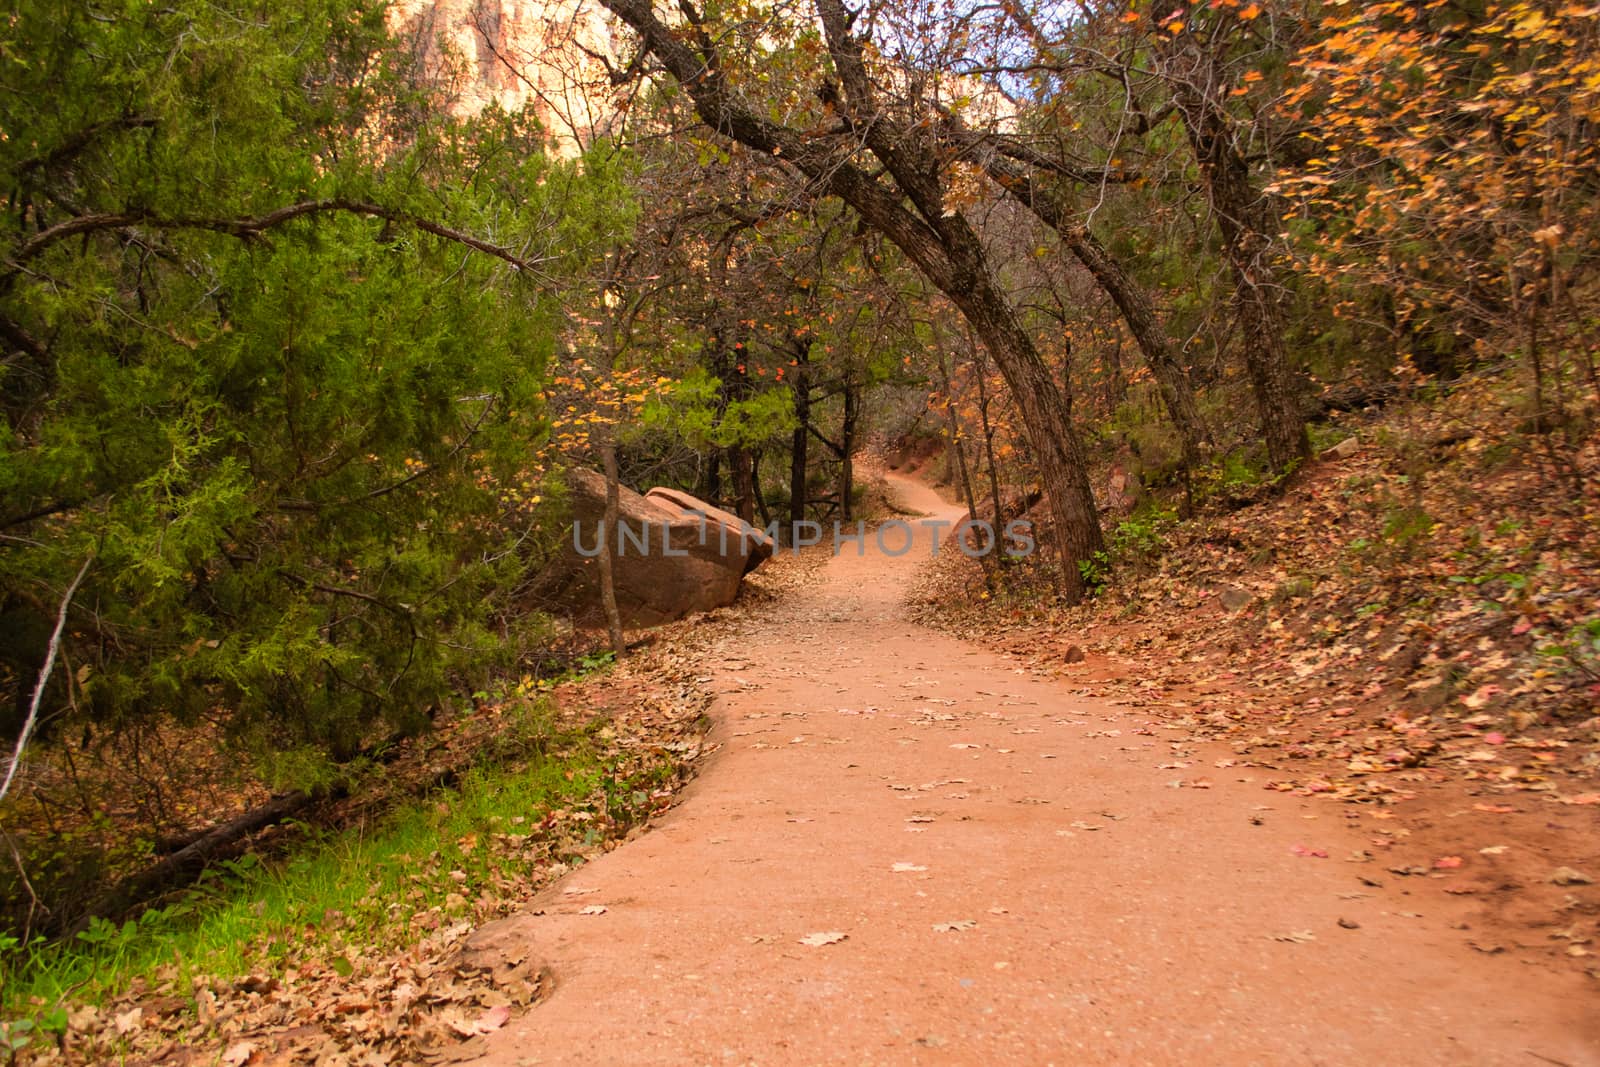 View on a hiking footpath in Zion national park in Utah, United States in autumn by kb79